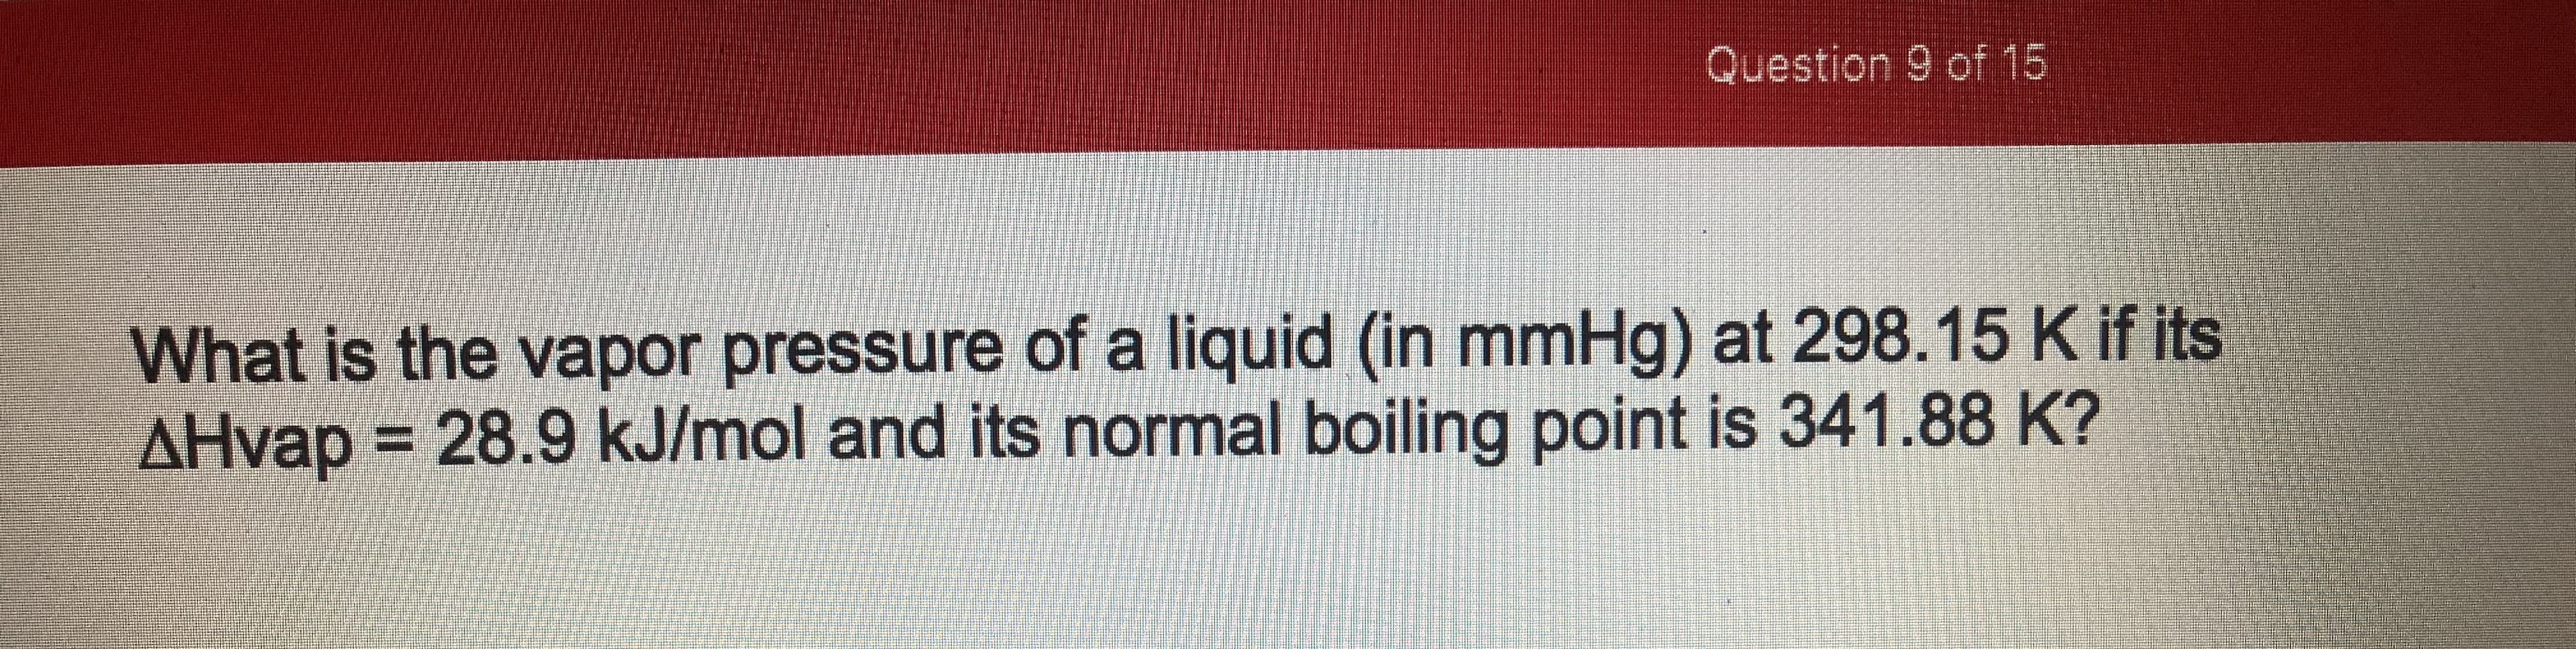 What is the vapor pressure of a liquid (in mmHg) at 298.15 K if its
AHvap = 28.9 kJ/mol and its normal boiling point is 341.88 K?
%3D
